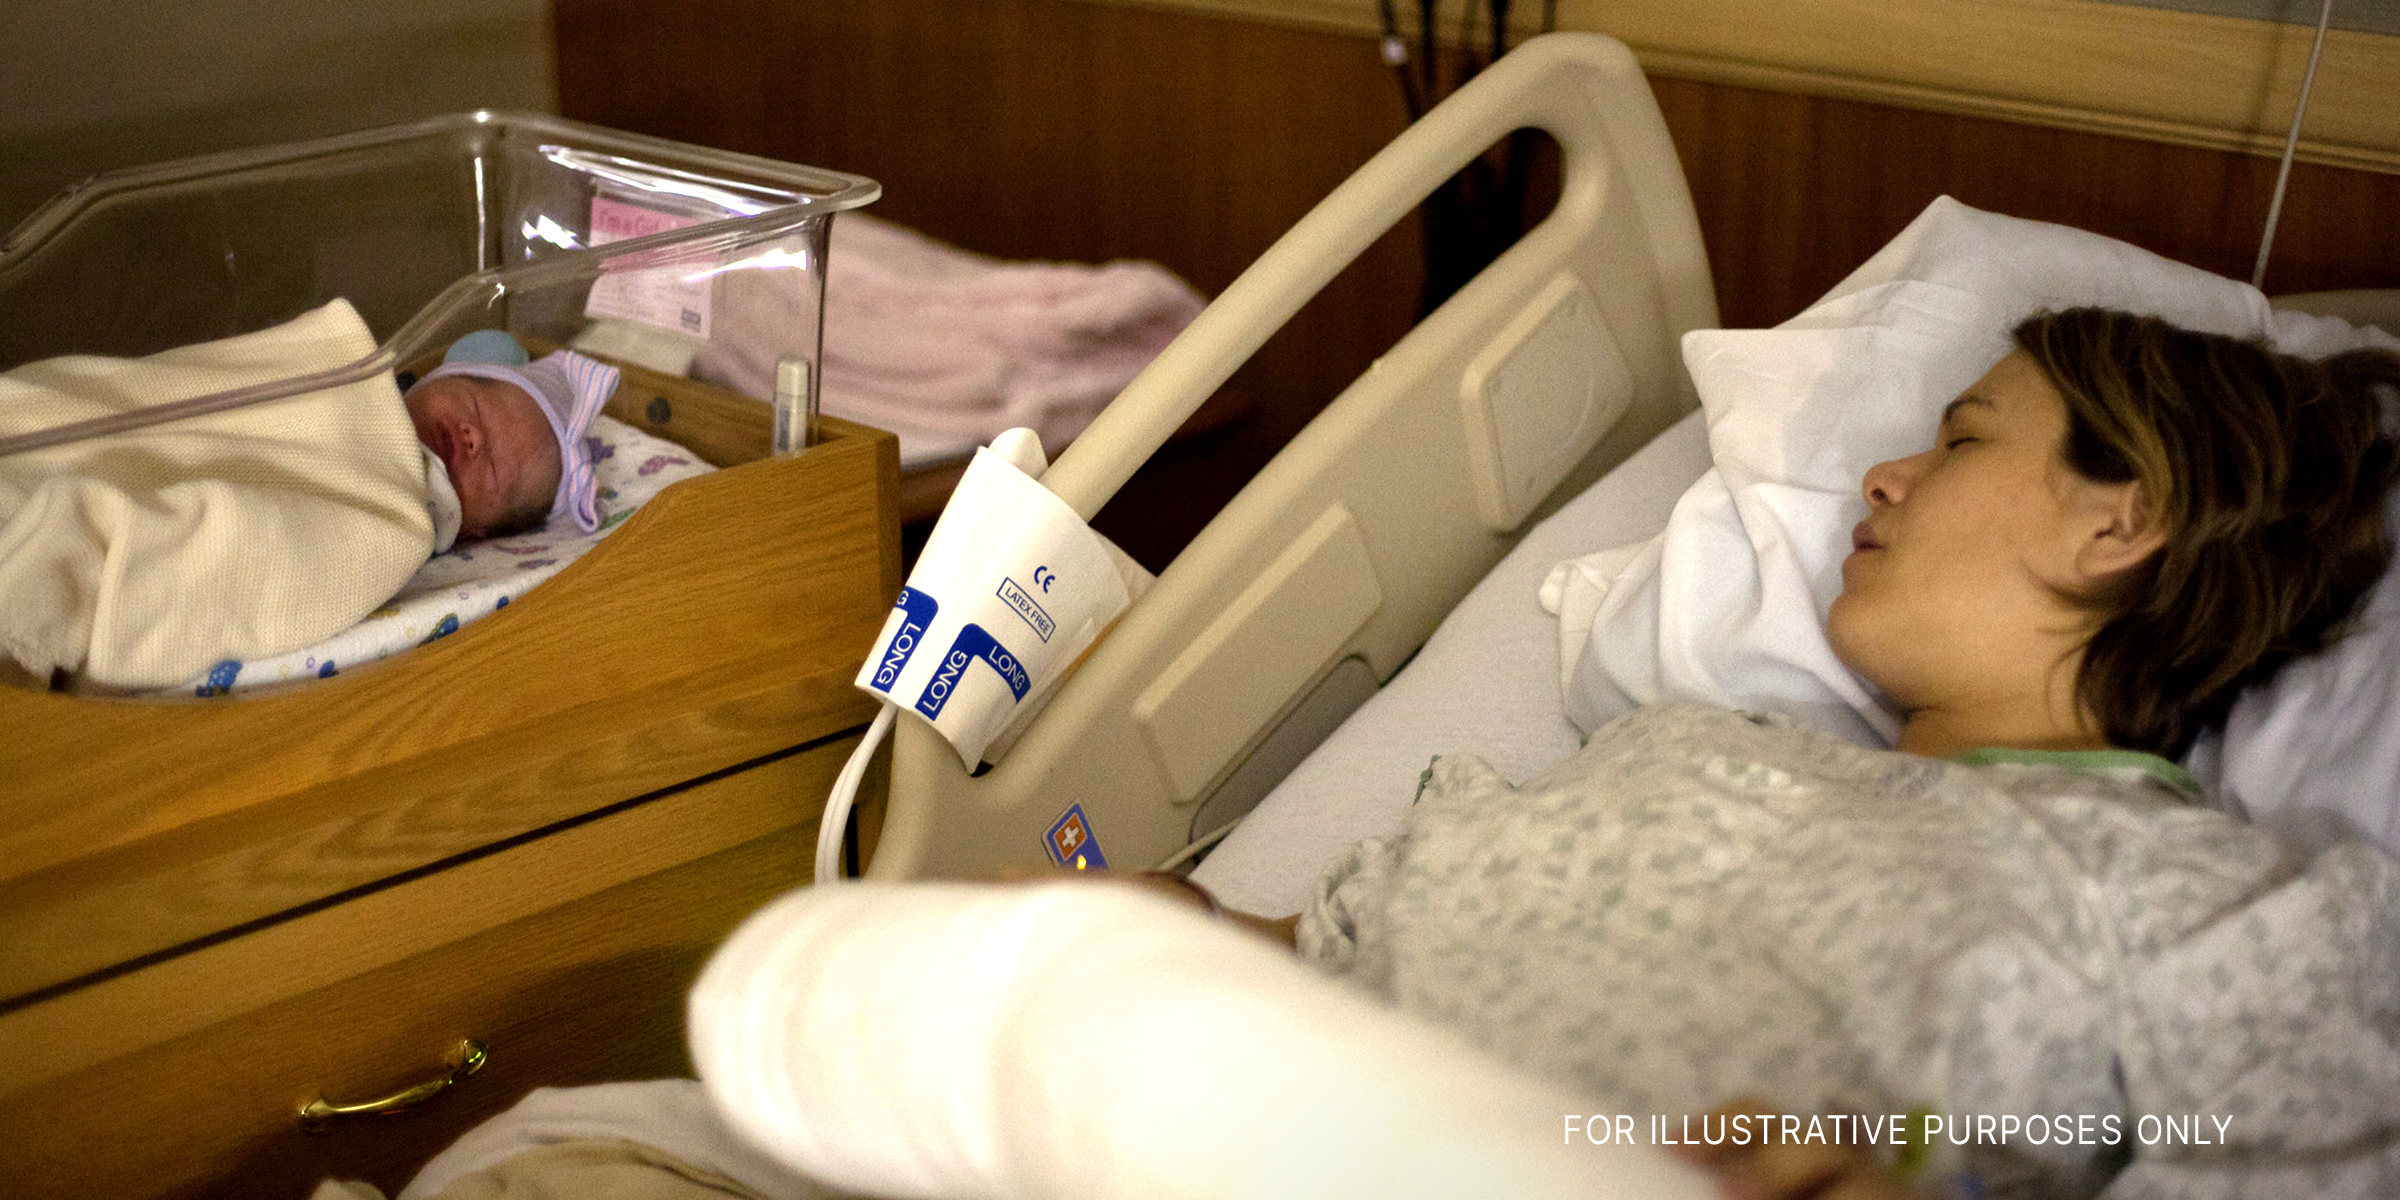 A woman sleeping in a hospital bed next to her newborn baby | Source: Flickr.com/Lars Plougmann/CC BY-SA 2.0